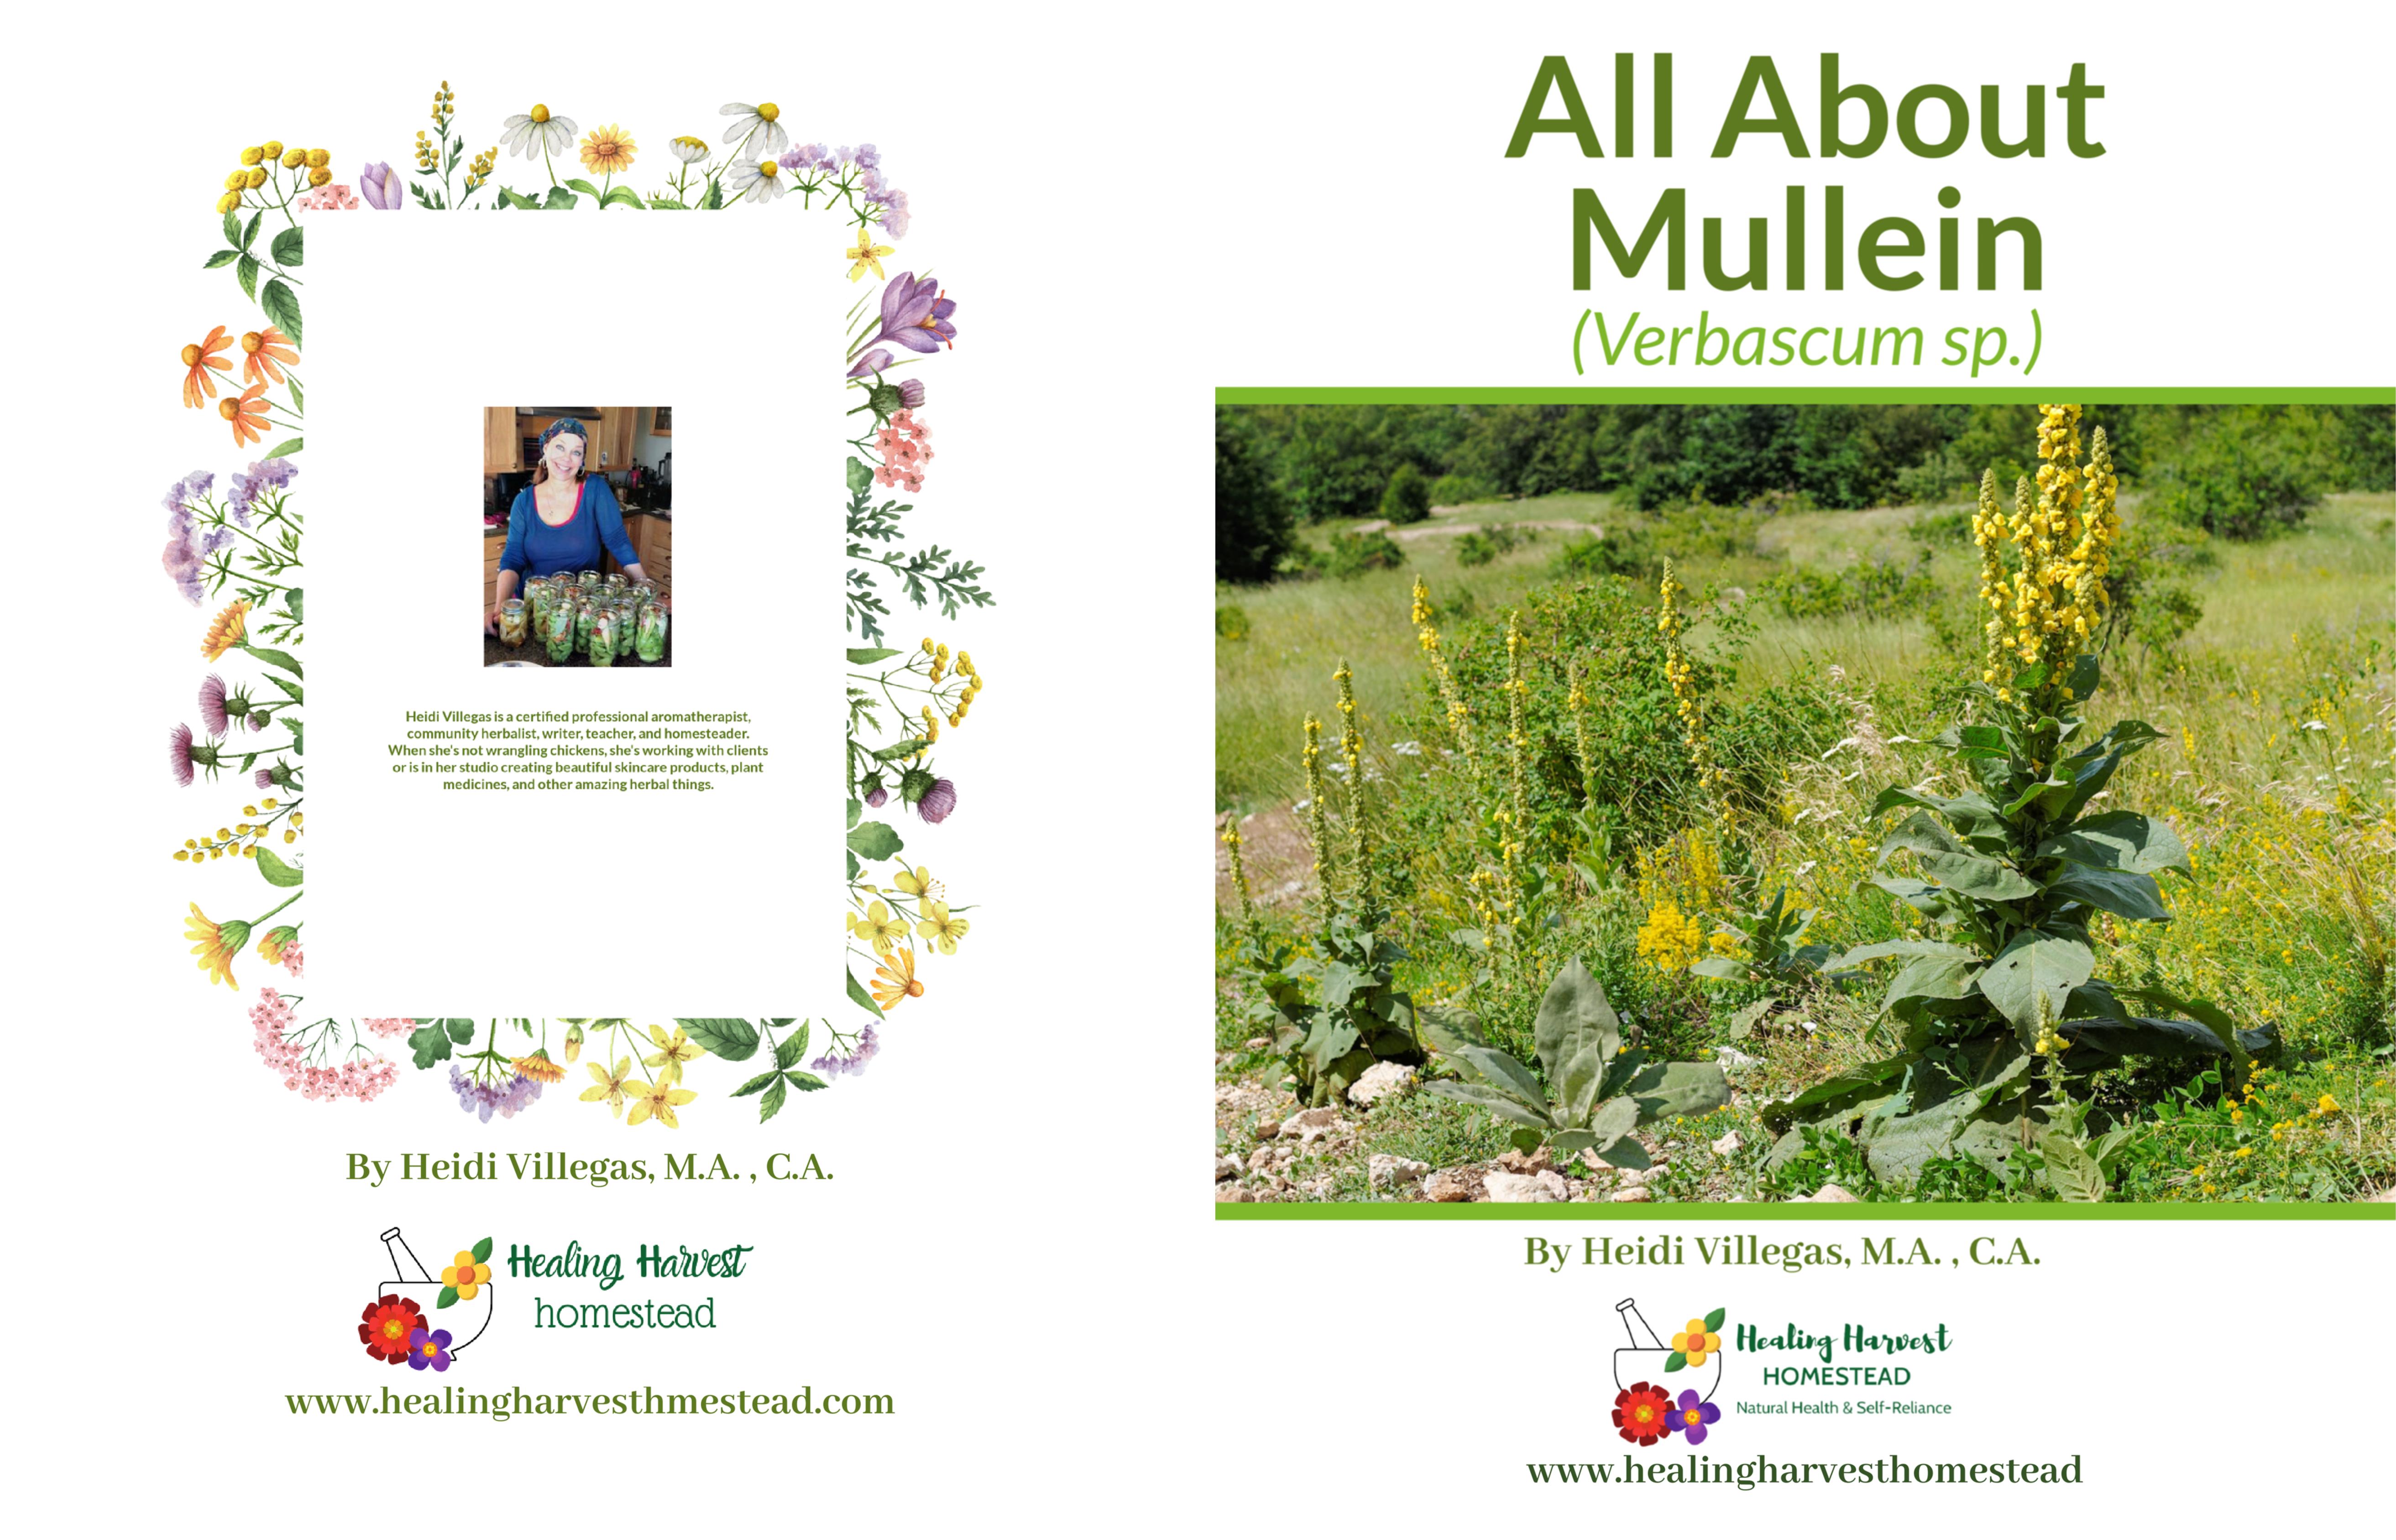 All About Mullein cover image